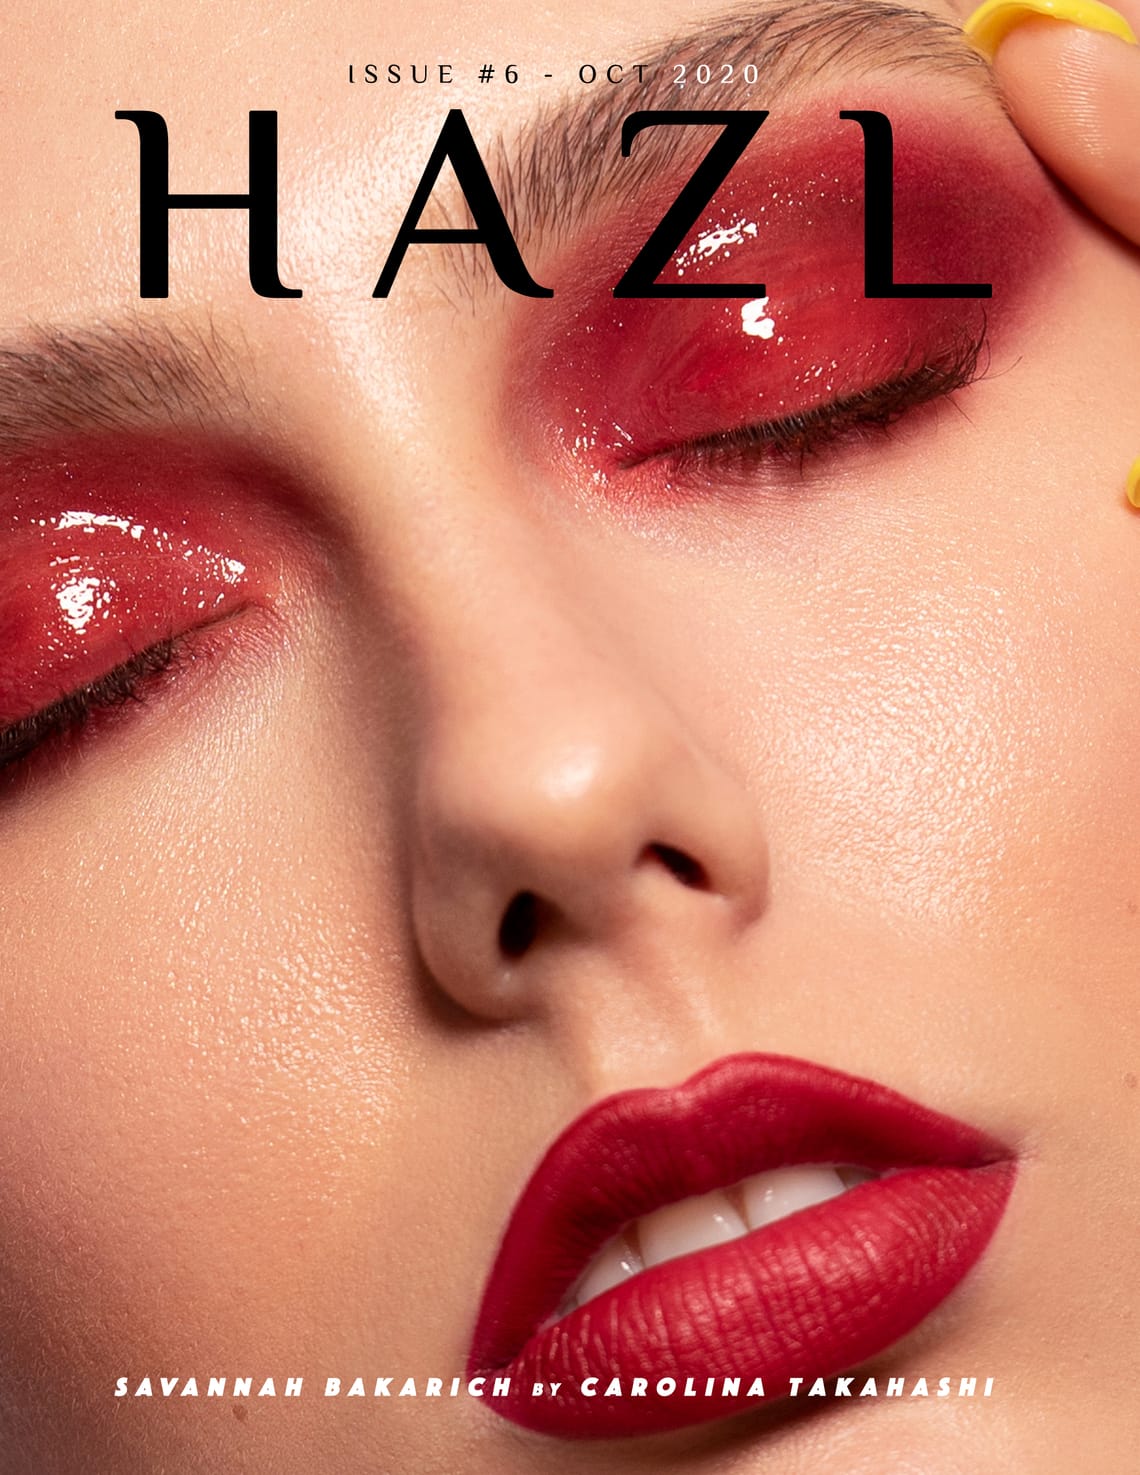 HAZL Magazine Issue #6 -  October 2020 Launched Worldwide